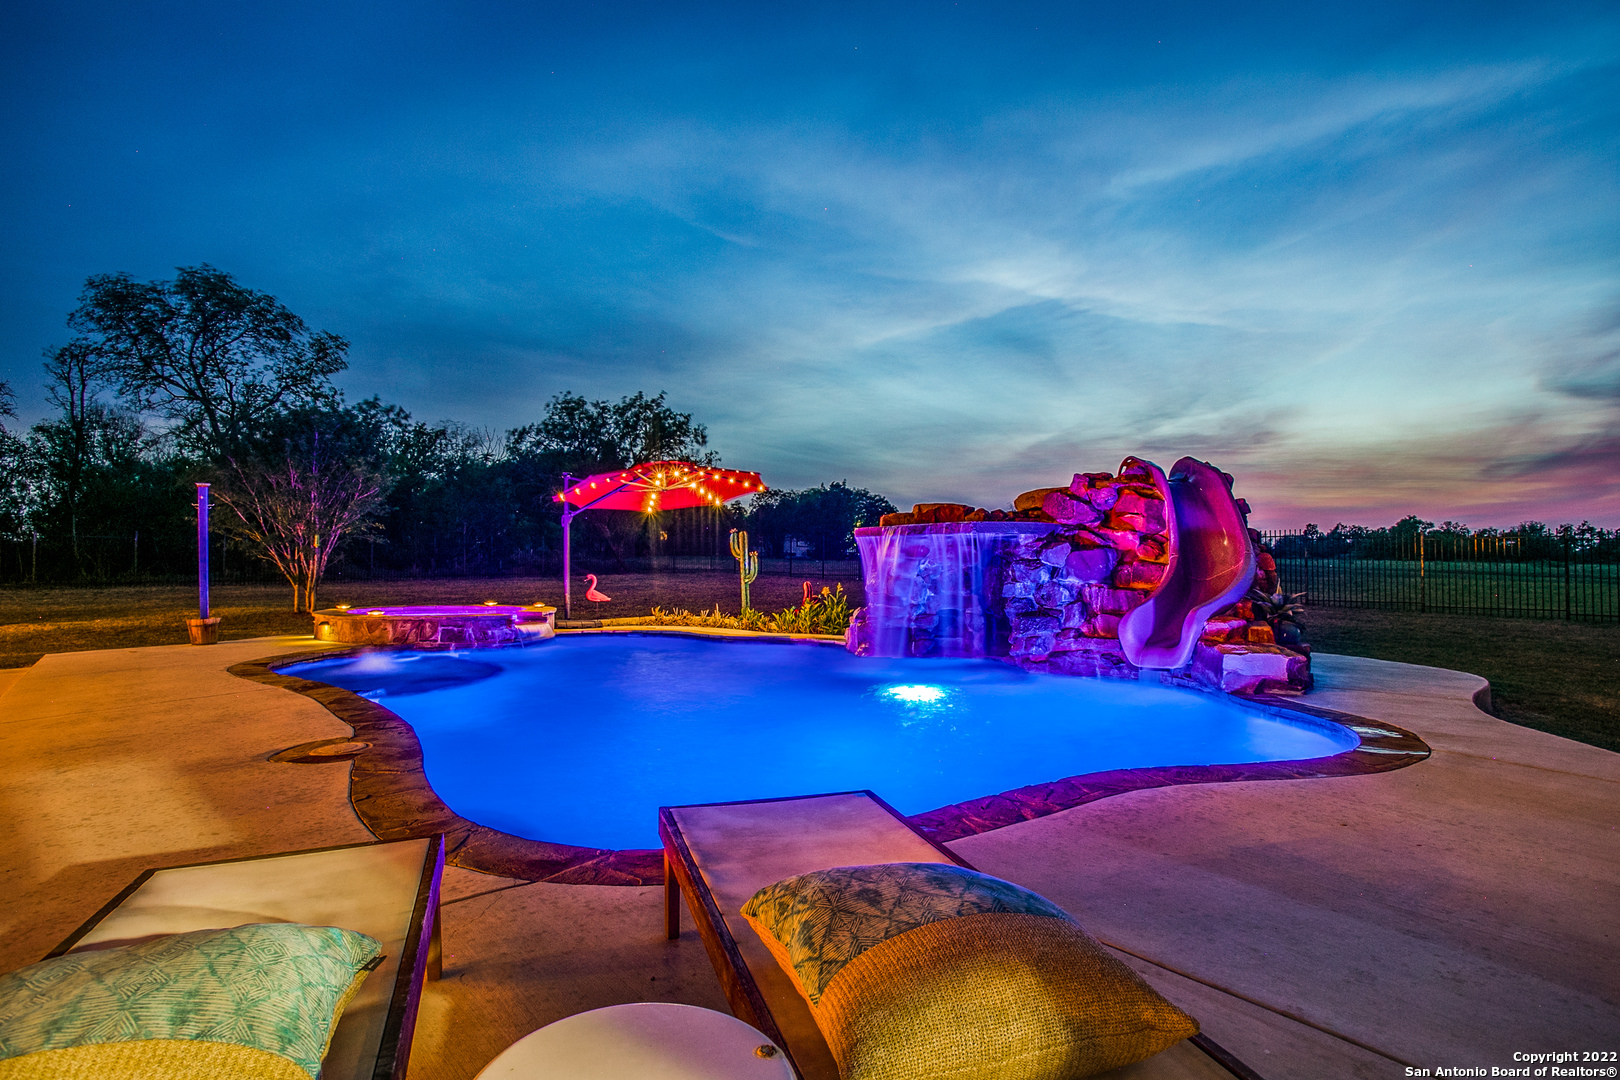 a view of a pool a fire pit and outdoor kitchen